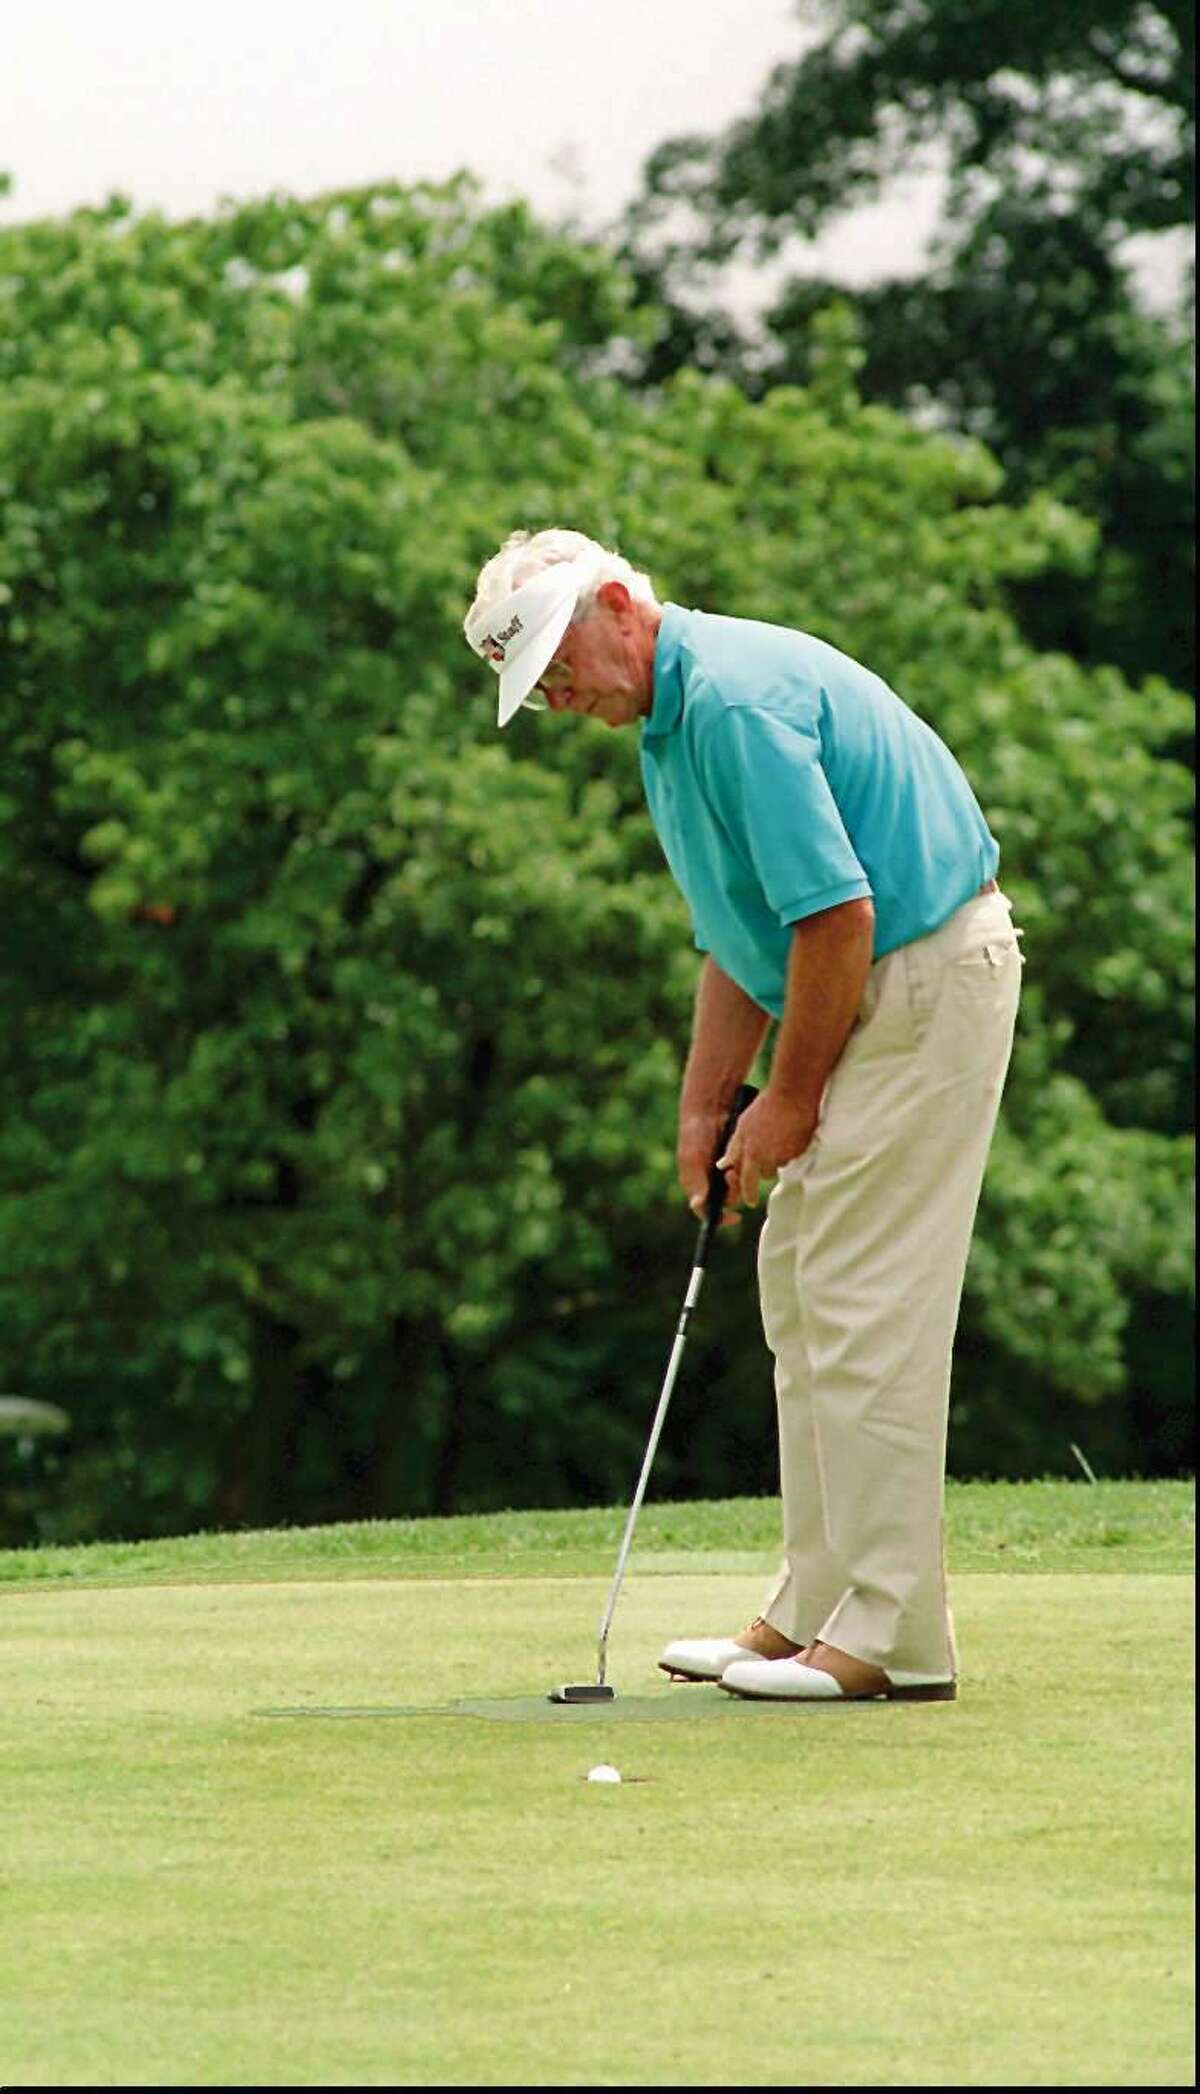 North Greenwich 7.6.95 - golf pro Billy Farrell of the Stanwich Club, sinks a putt on the 18th Green at the Stanwich Country Club. Photo/Mel Greer COLOR